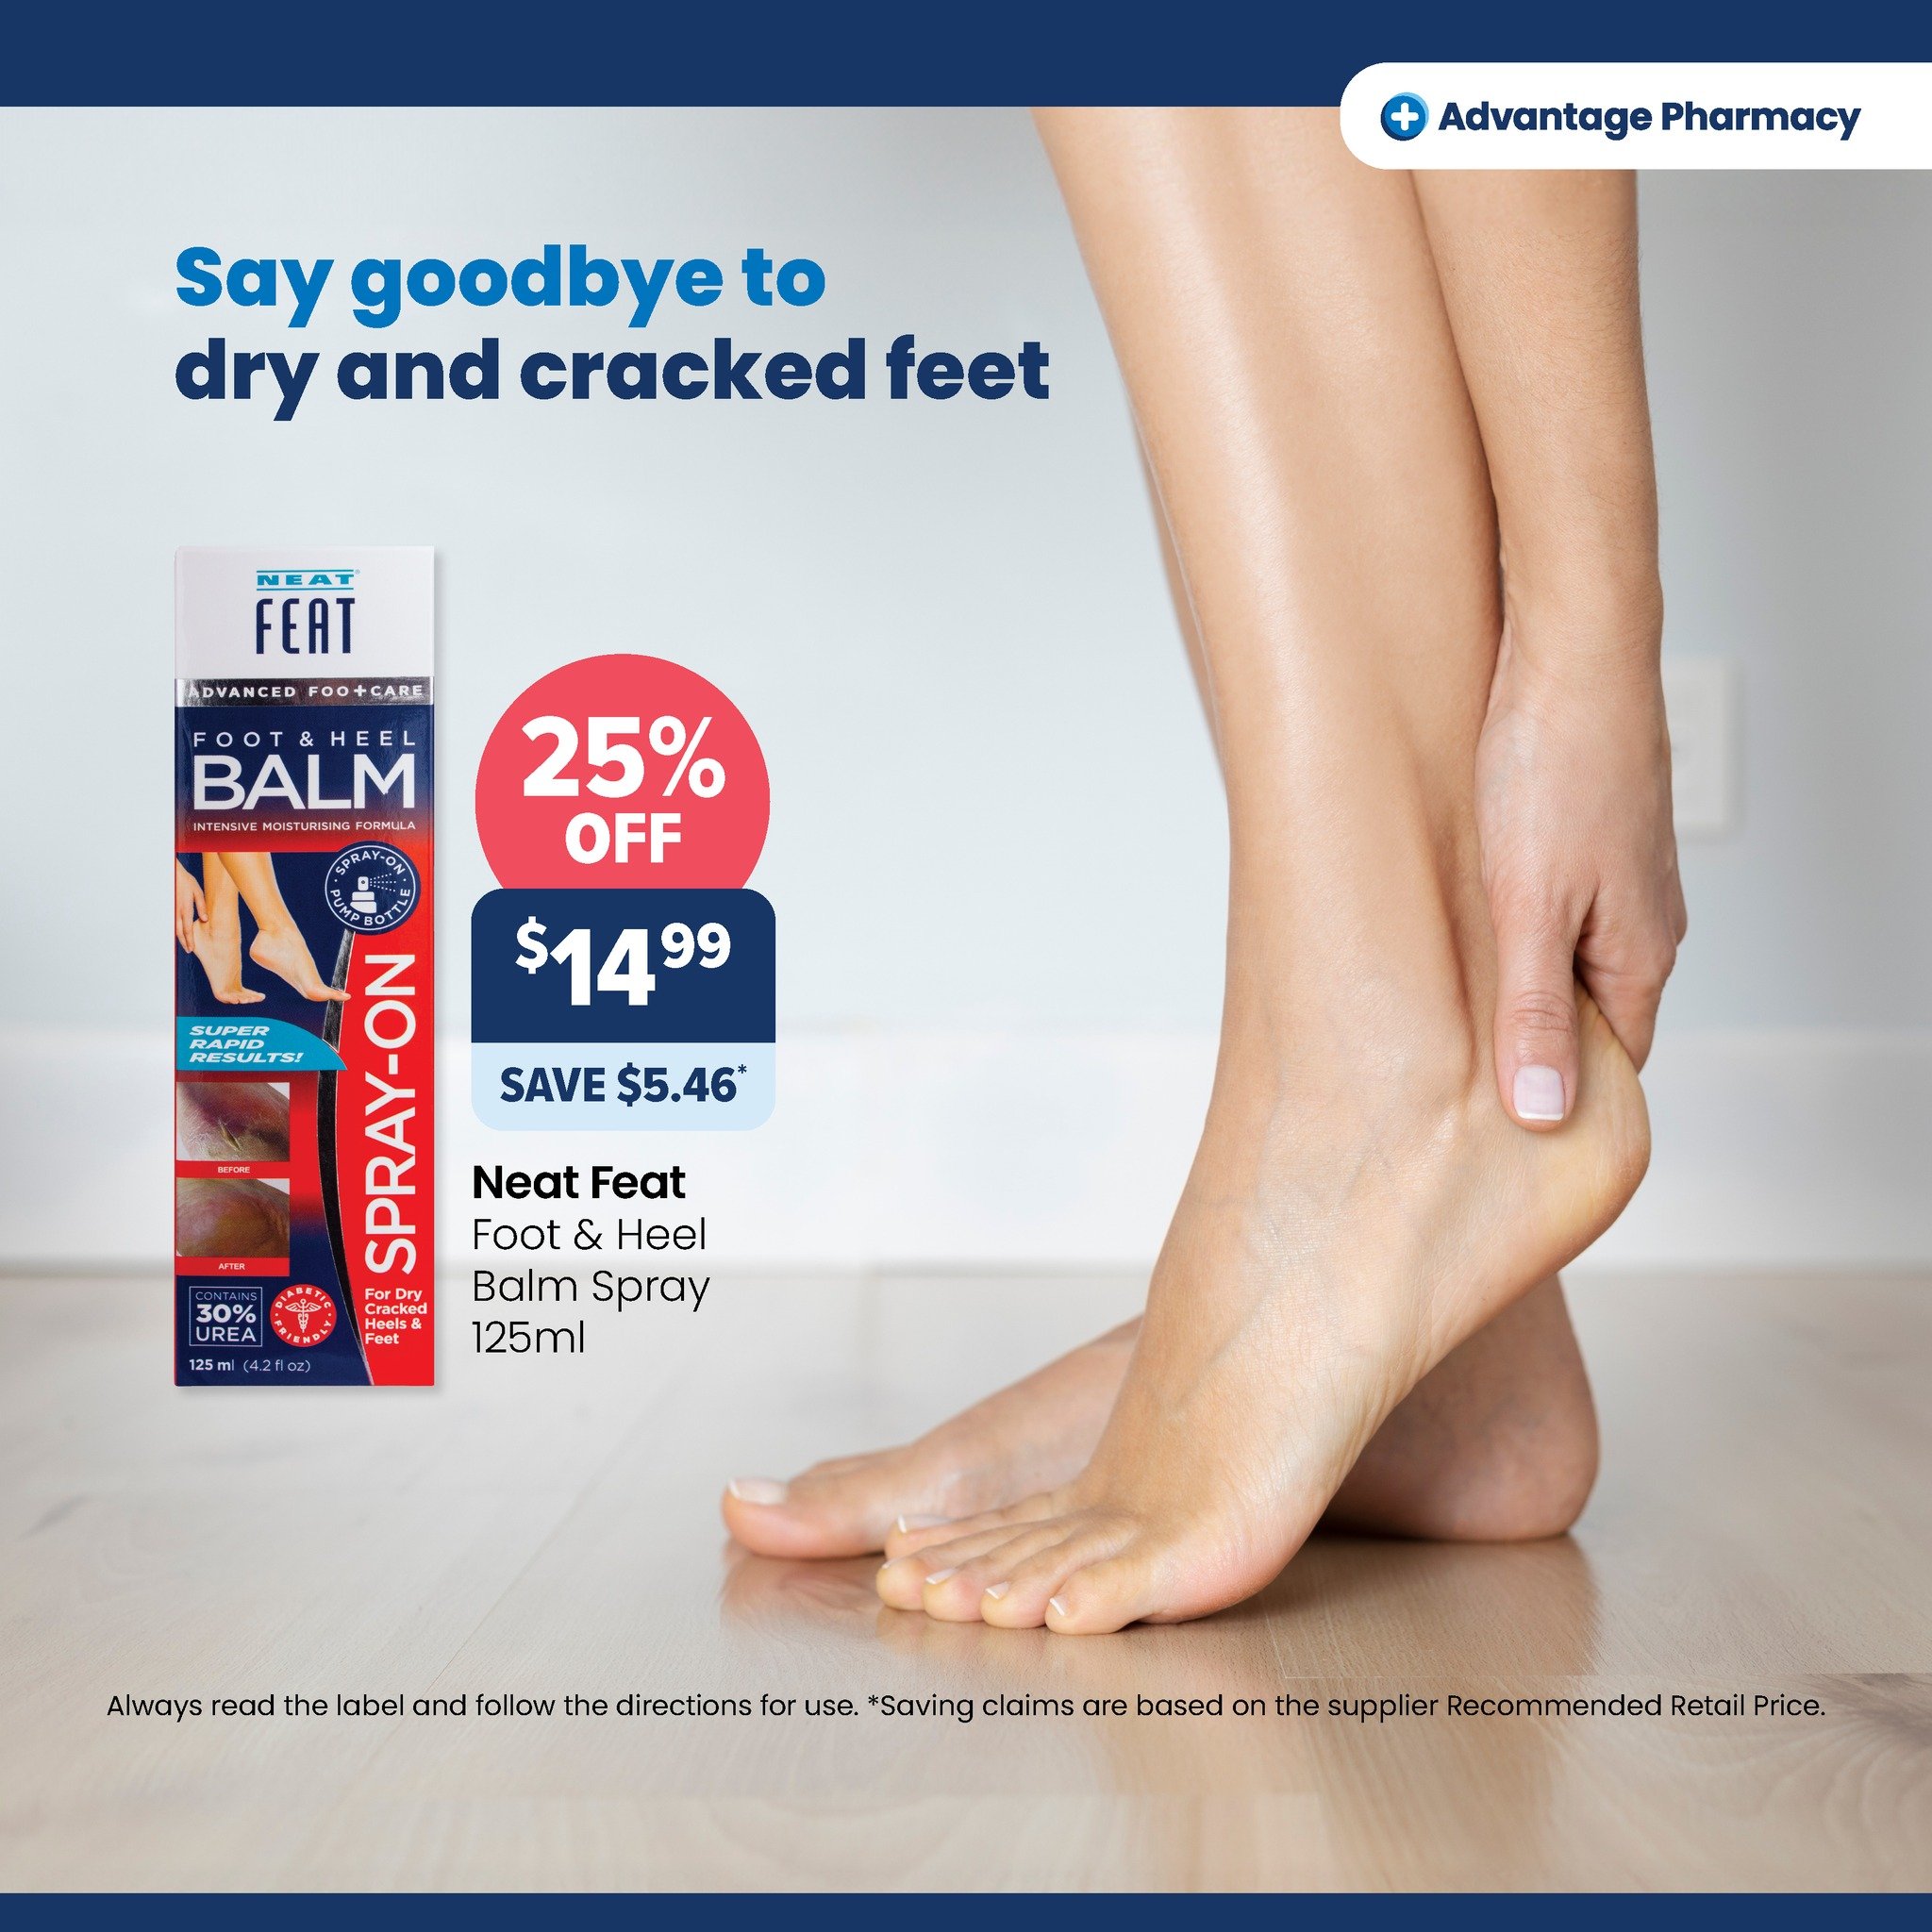 Do you struggle with dry and cracked feet or heels?
Neat Feet Foot &amp; Heal Balm Spray is scientifically formulated to hydrate and repair dry and damaged skin. With an easy to use spray nozzle, you'll say hello to
soft and smooth feet in not time.
